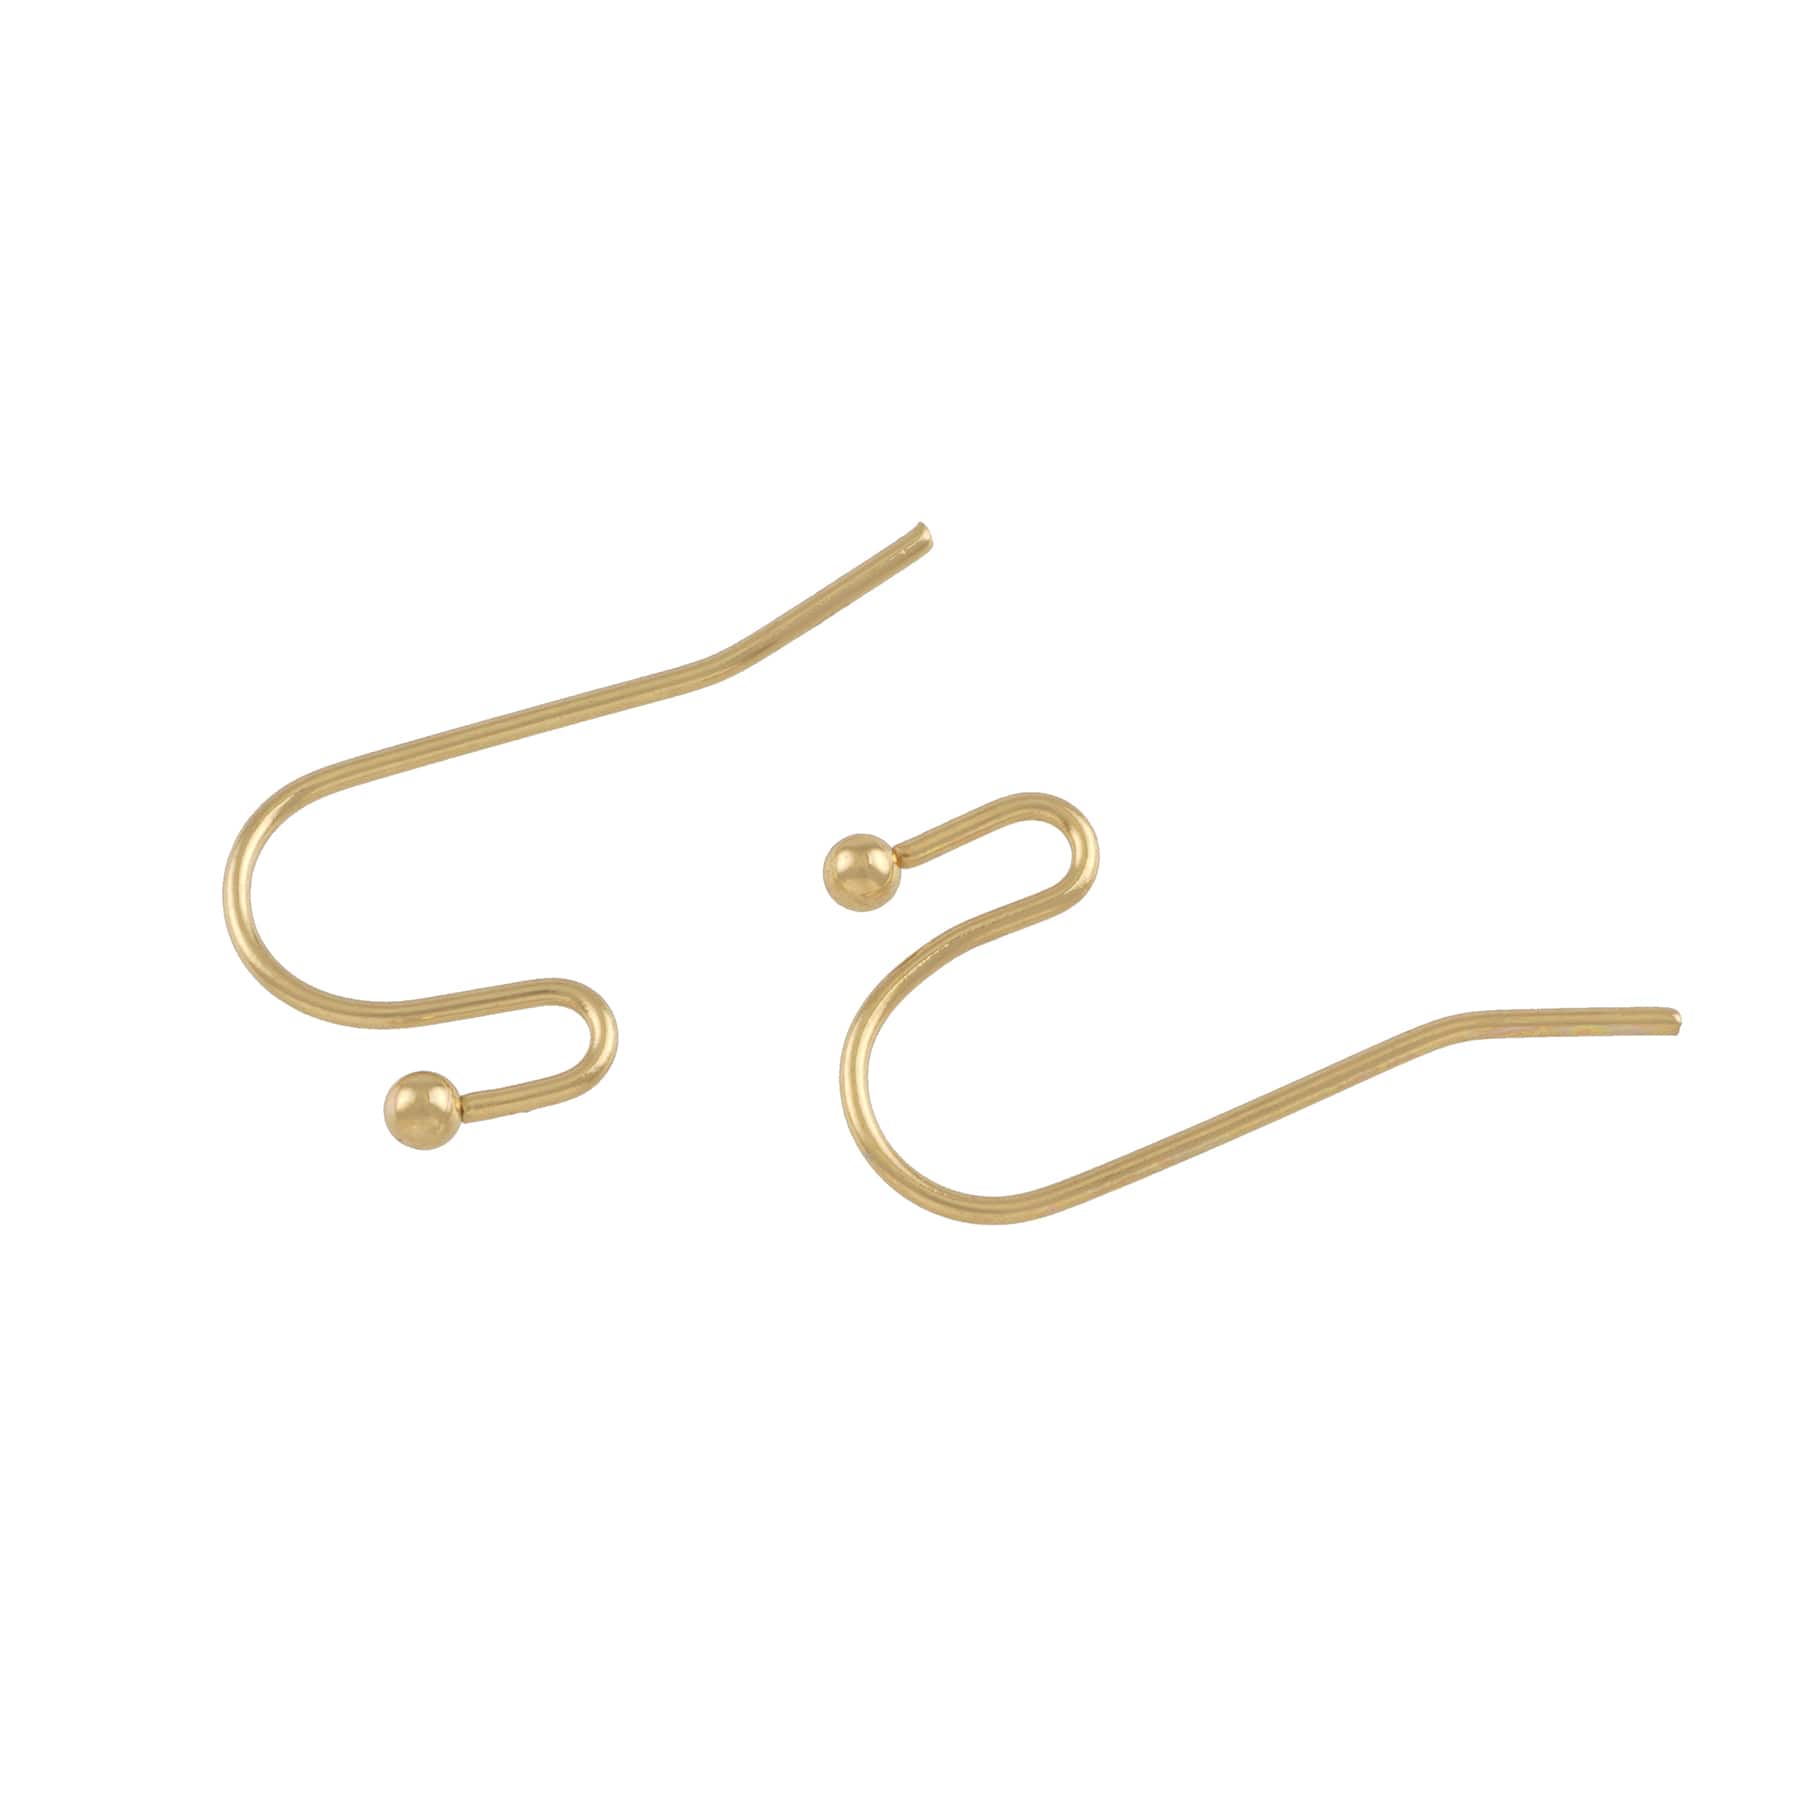 12mm Sterling Silver Fish Hook Ear Wires, 2ct. by Bead Landing™